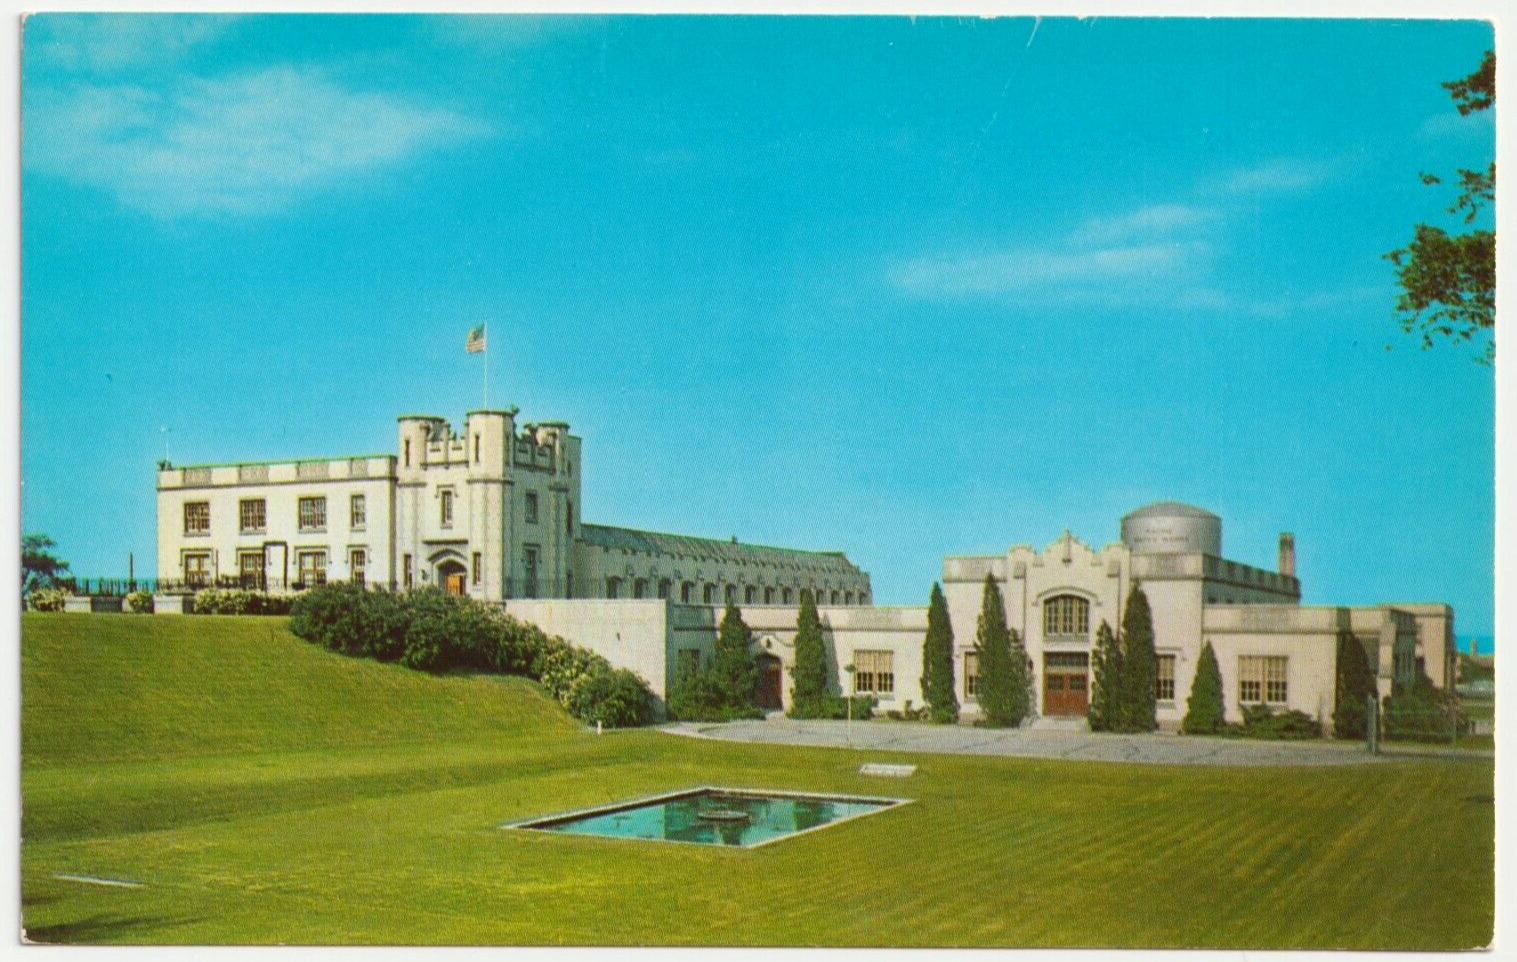 Pumping Station and Filtration Plant-Racine, Wisconsin WI-vintage postcard 1951